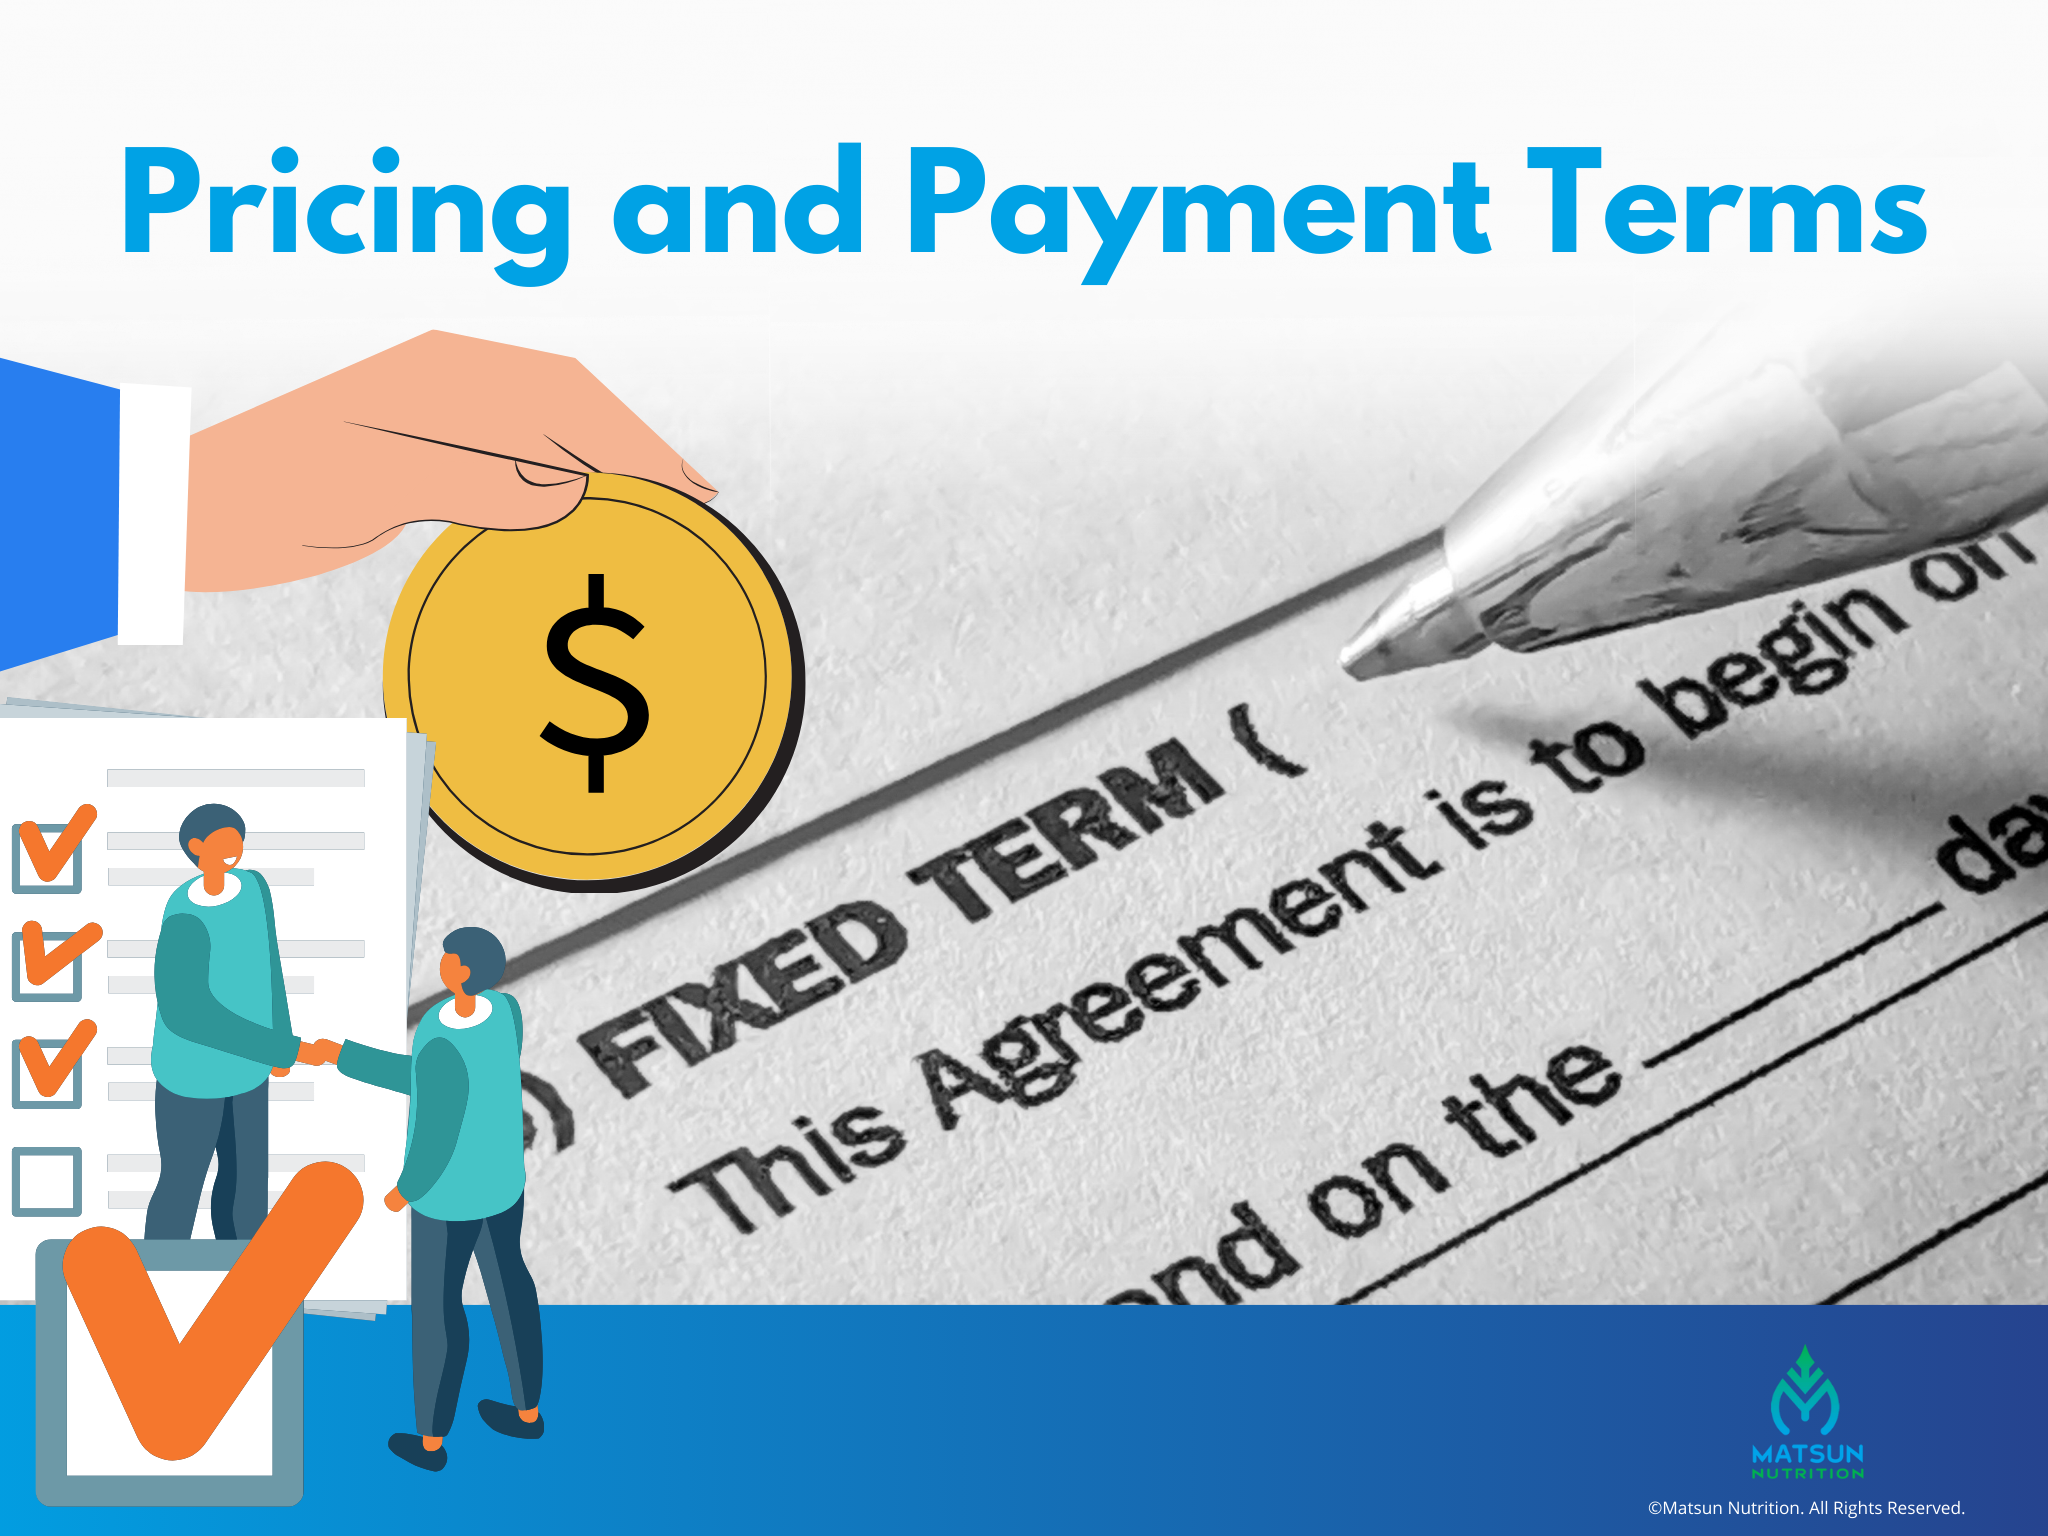 Pricing and Payment Terms